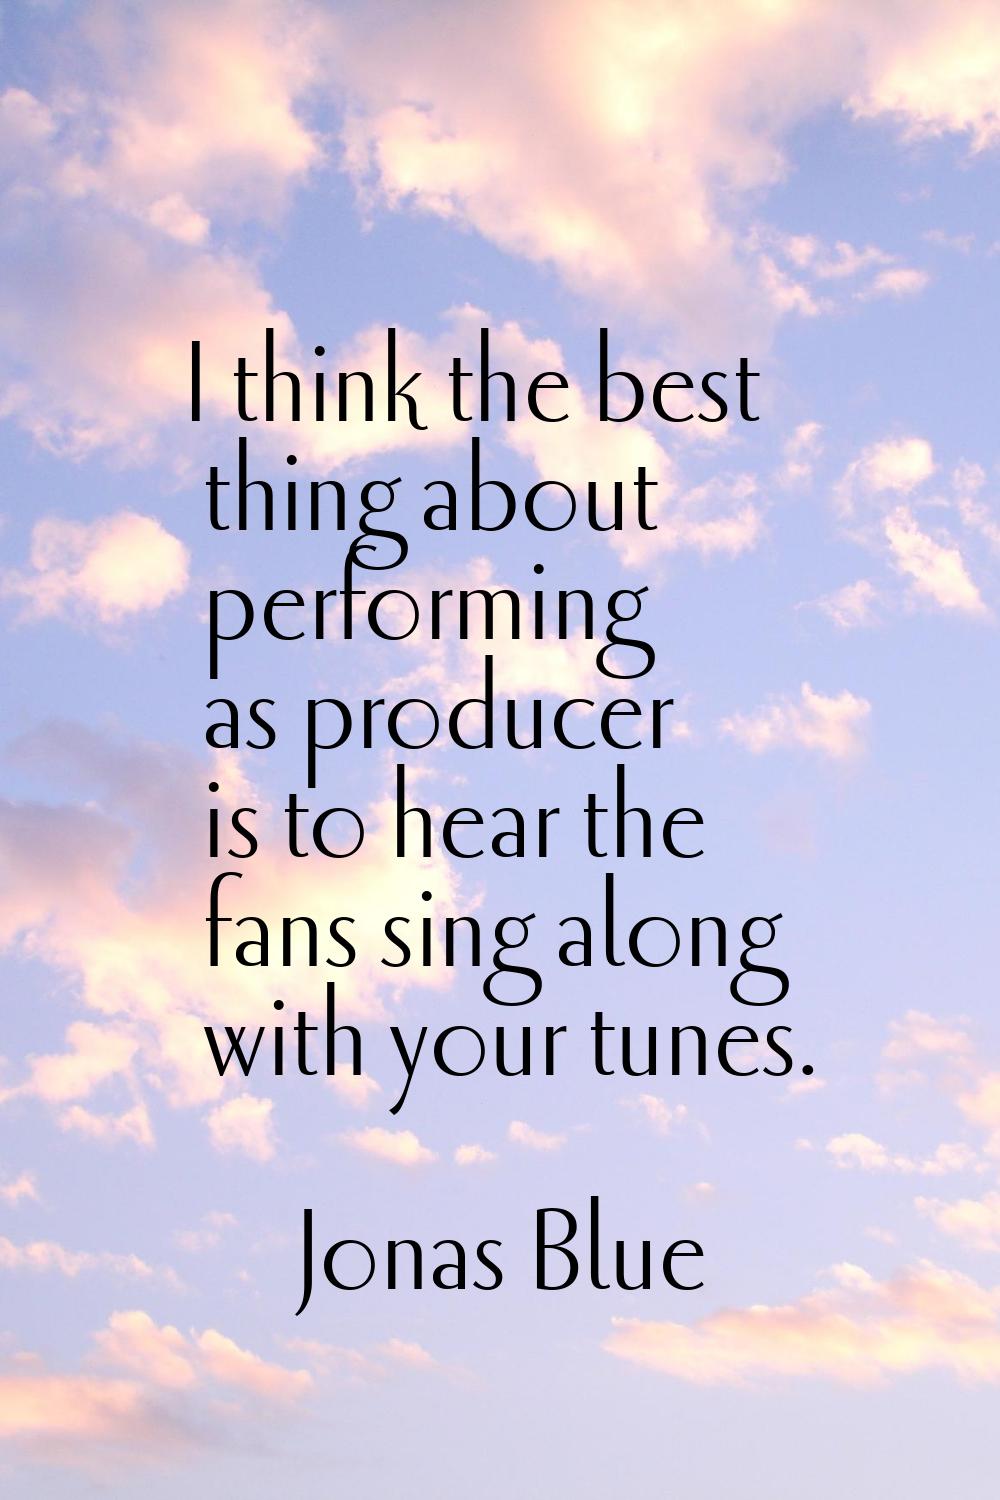 I think the best thing about performing as producer is to hear the fans sing along with your tunes.